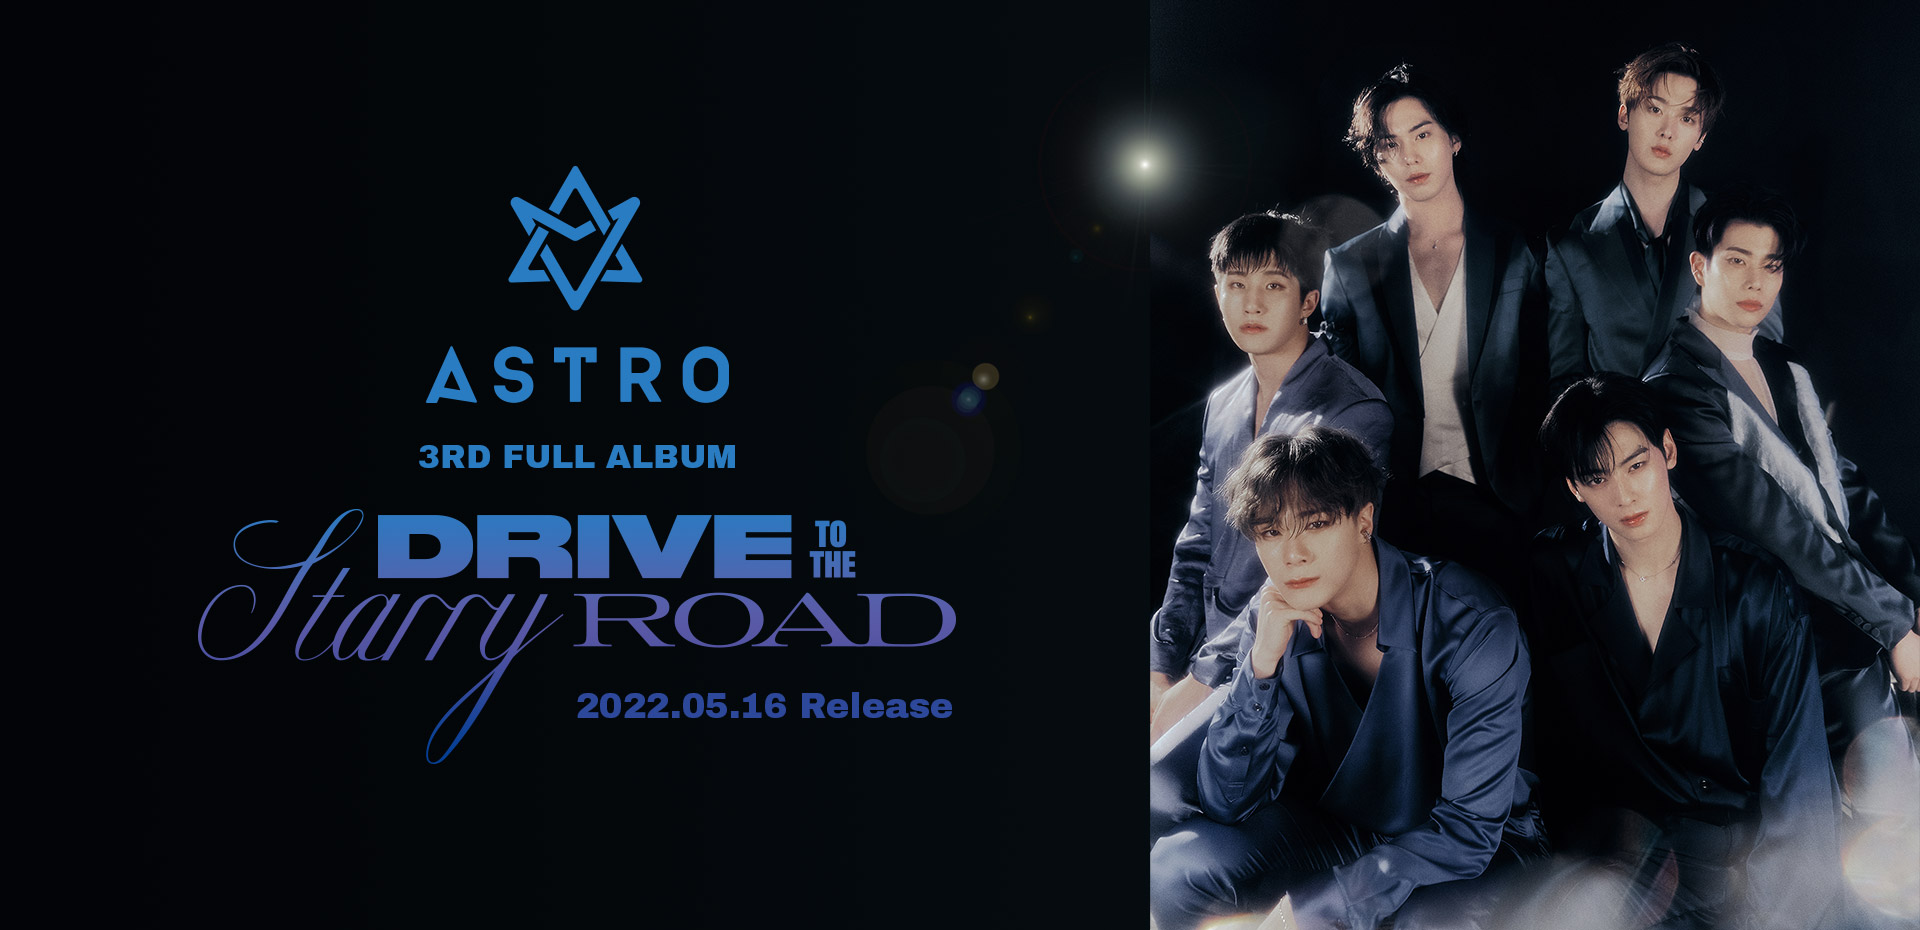 ASTRO 3RD FULL ALBUM‘Drive to the Starry Road’2022.05.16 Release